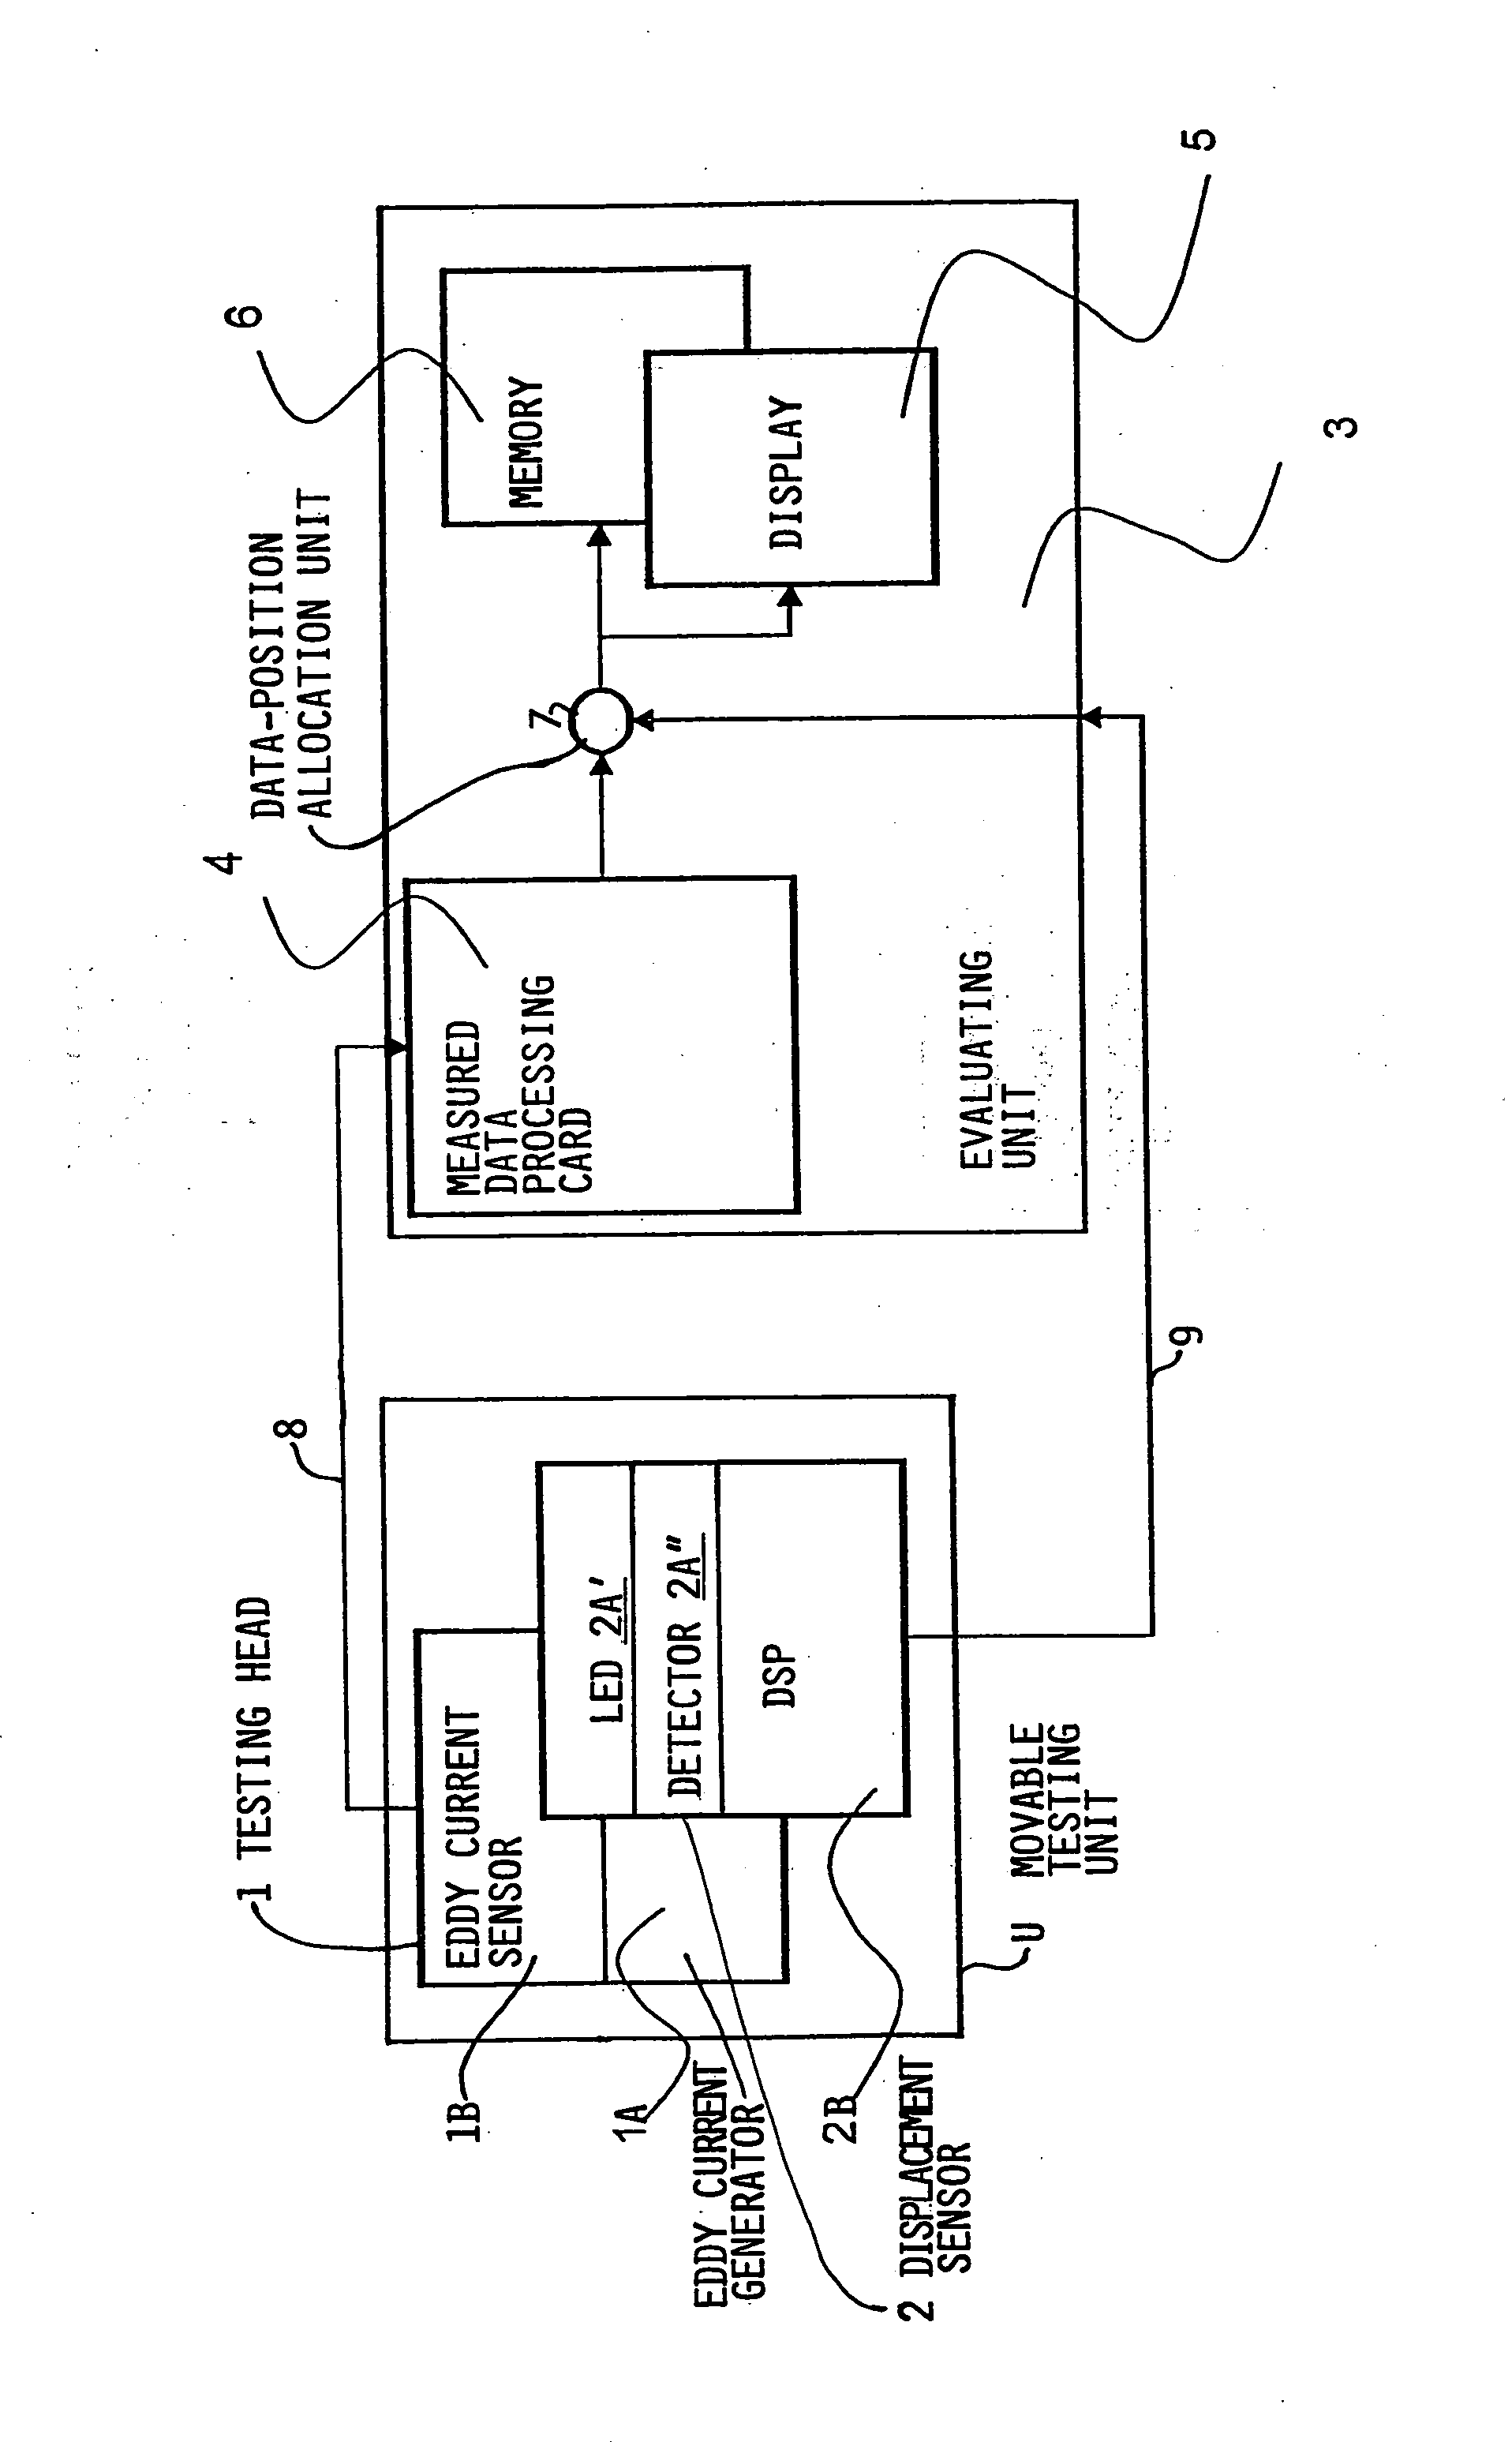 Eddy current testing apparatus with integrated position sensor